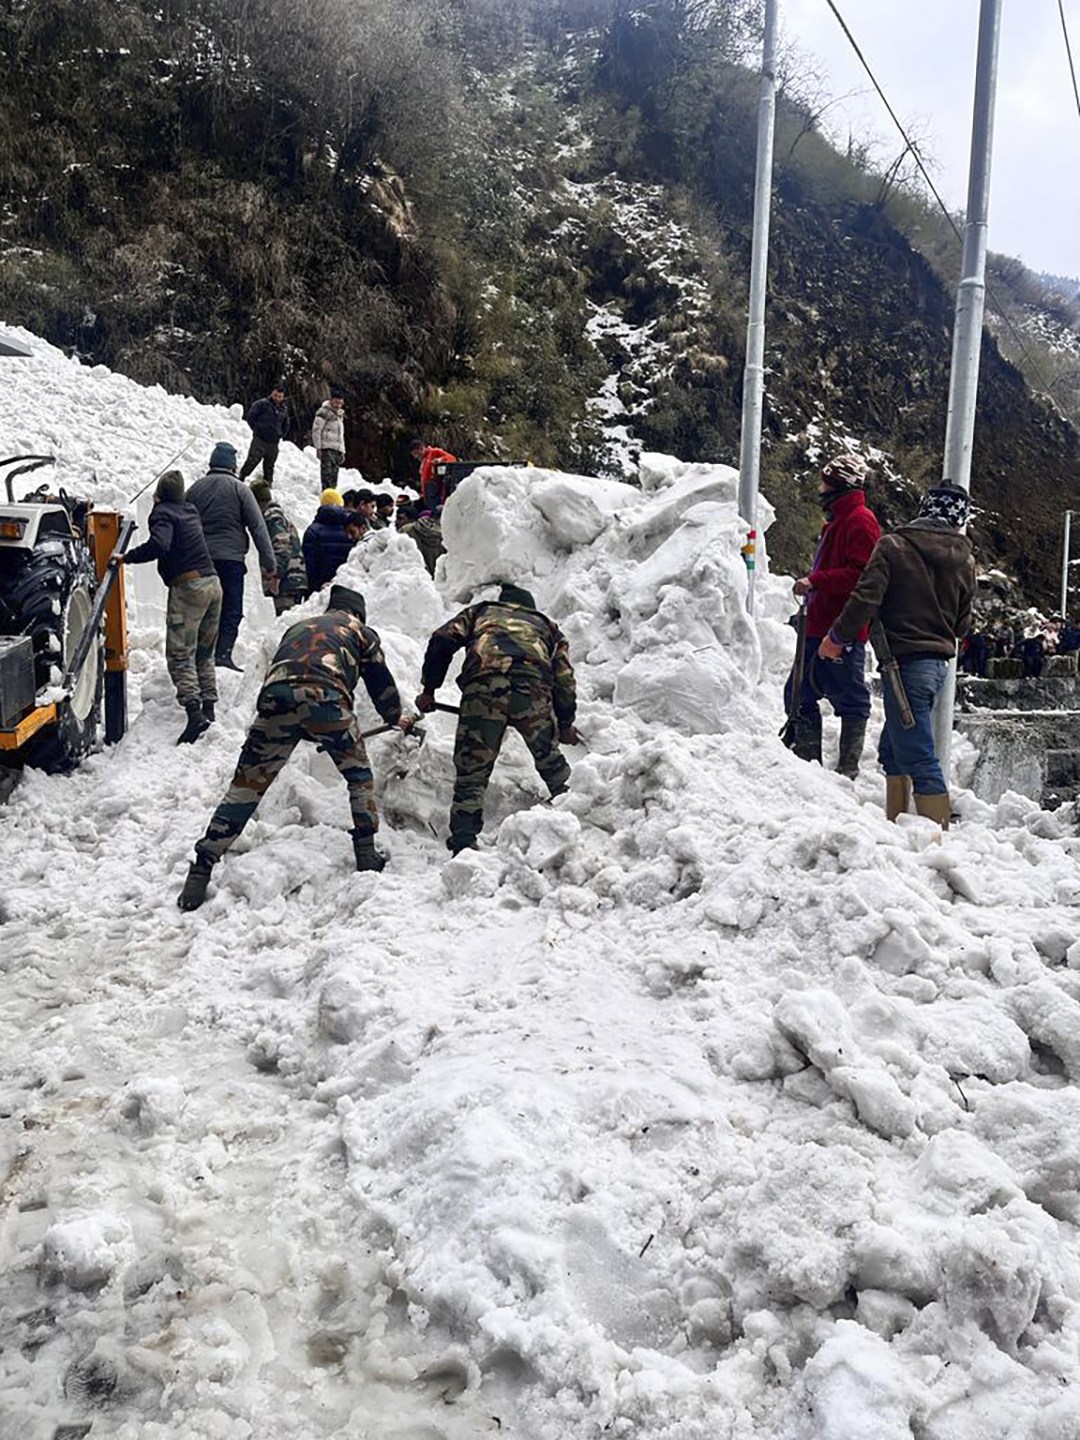 Soldiers clear snow from an avalanche near Nathu La mountain pass in India's Sikkim state (Indian Army via AP)